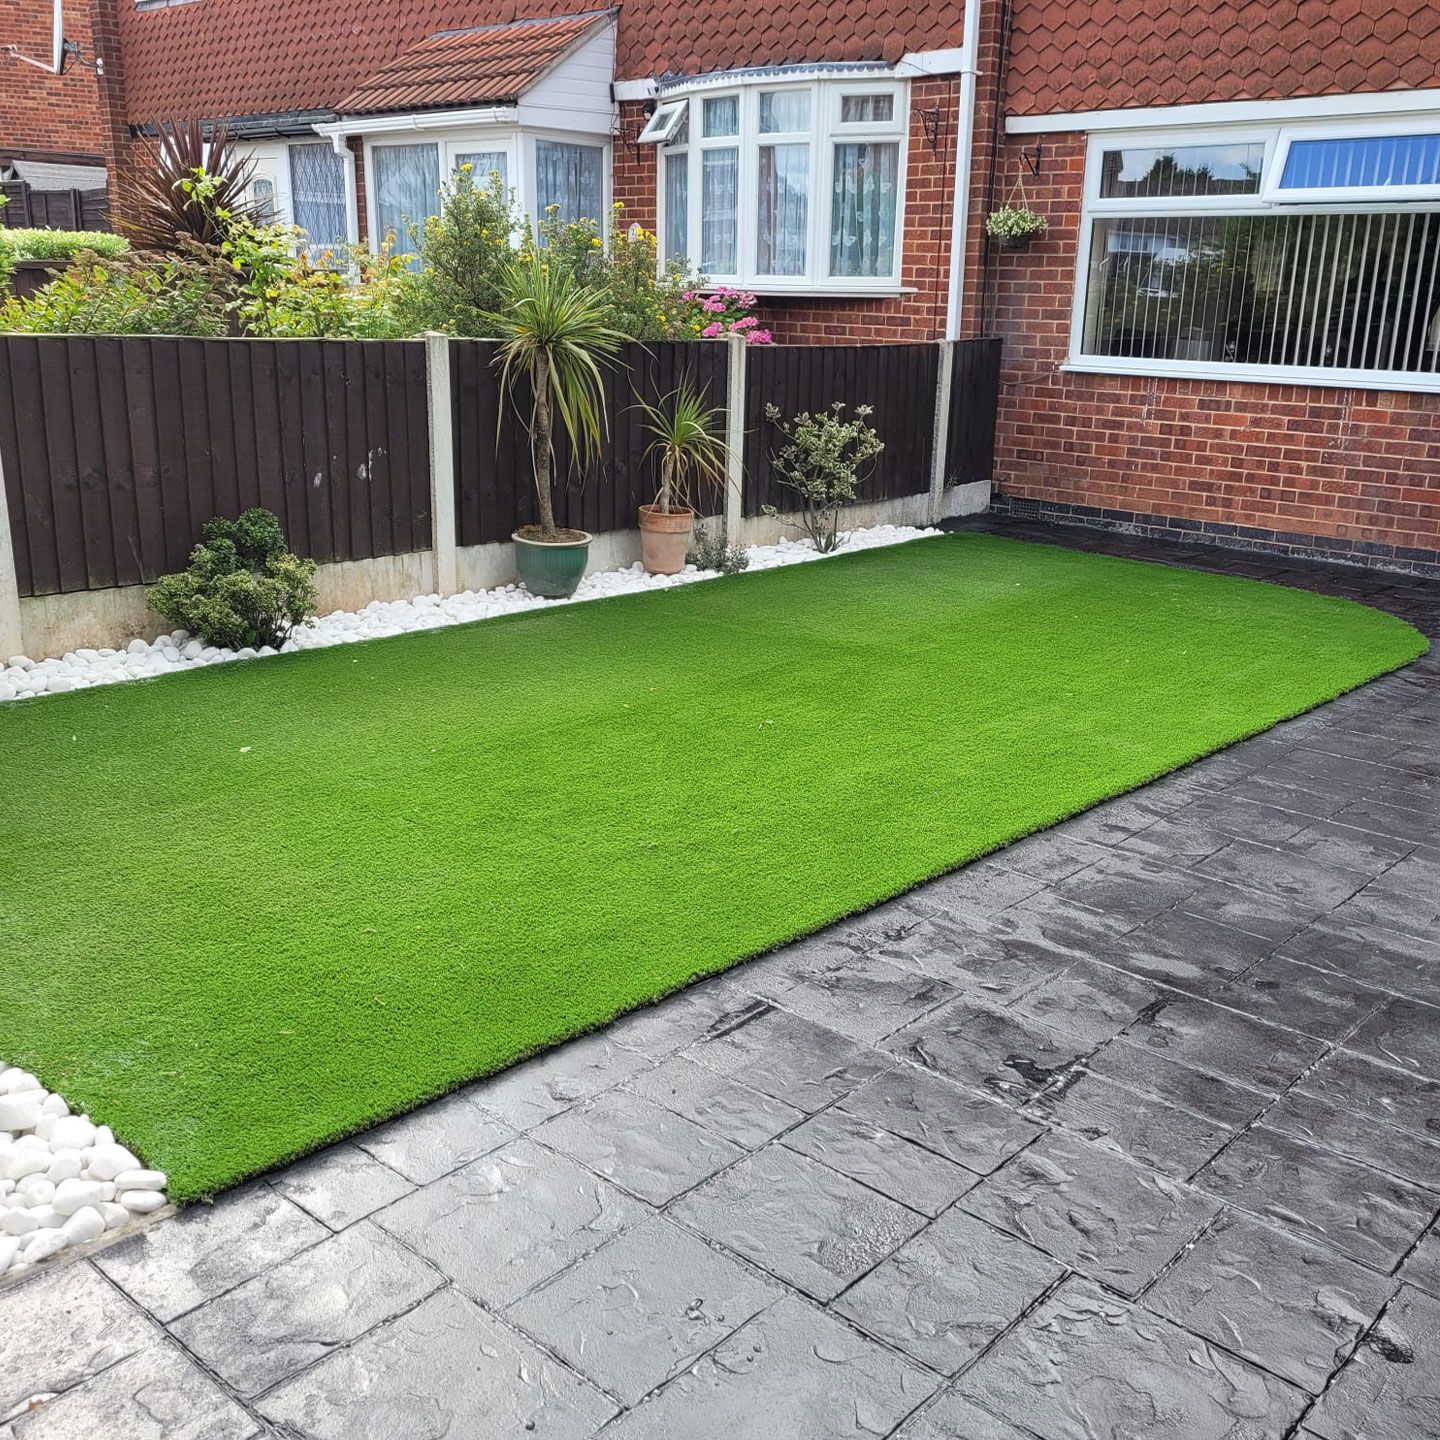 landscaping in Bulkington showing new artificial grass and patterned concrete paving